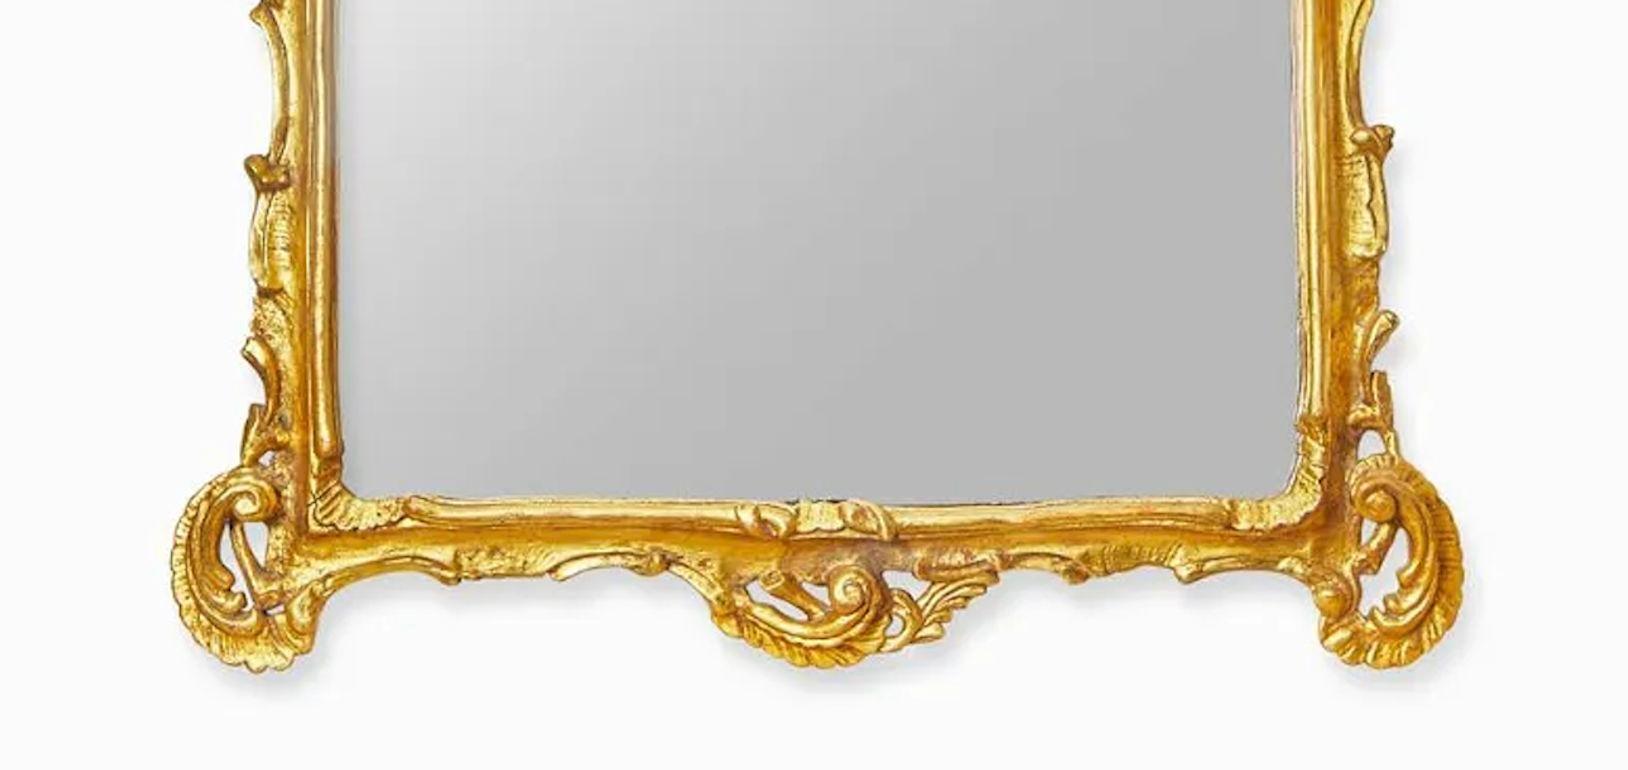 A pair of impressive Italian Rococo giltwood mirrors from the late 19th century. Great foliate hand-carved details.
Dimensions:
59